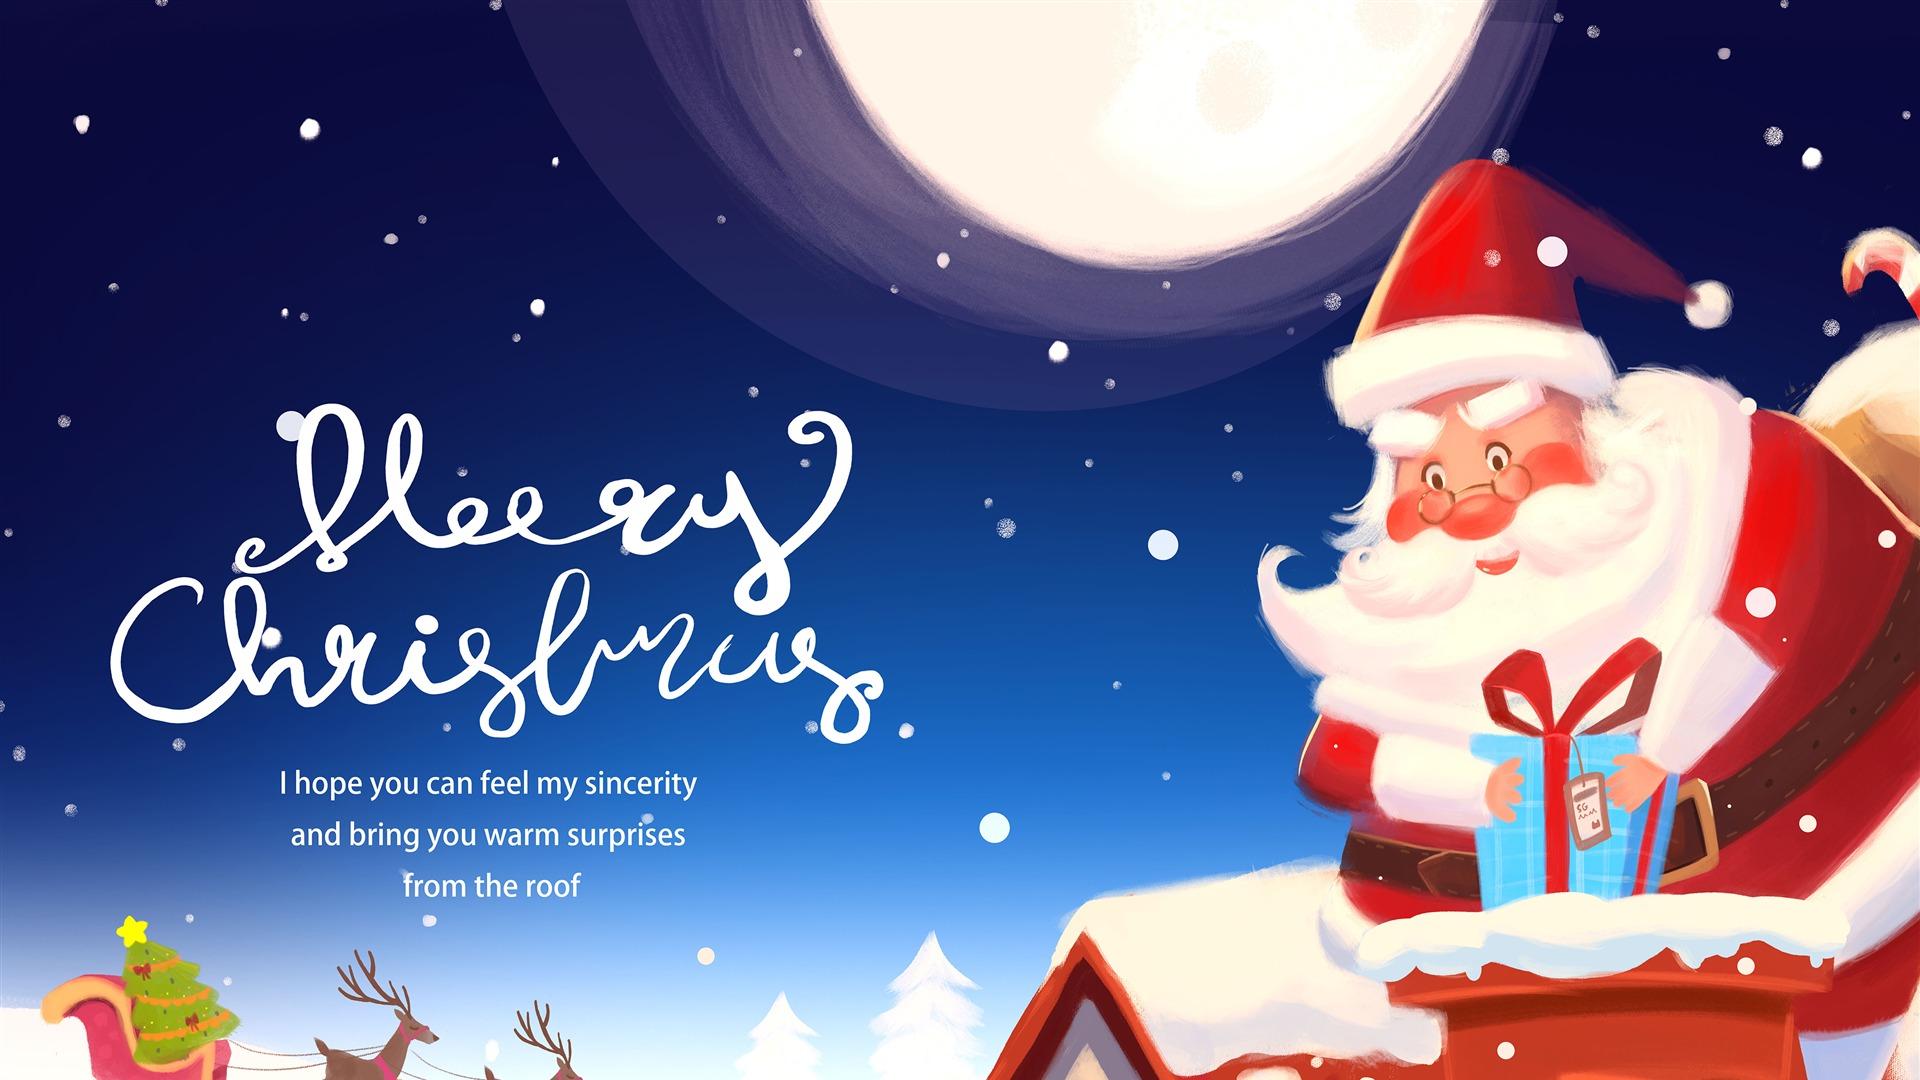 Merry Christmas 2021 Wallpapers - Wallpaper Cave